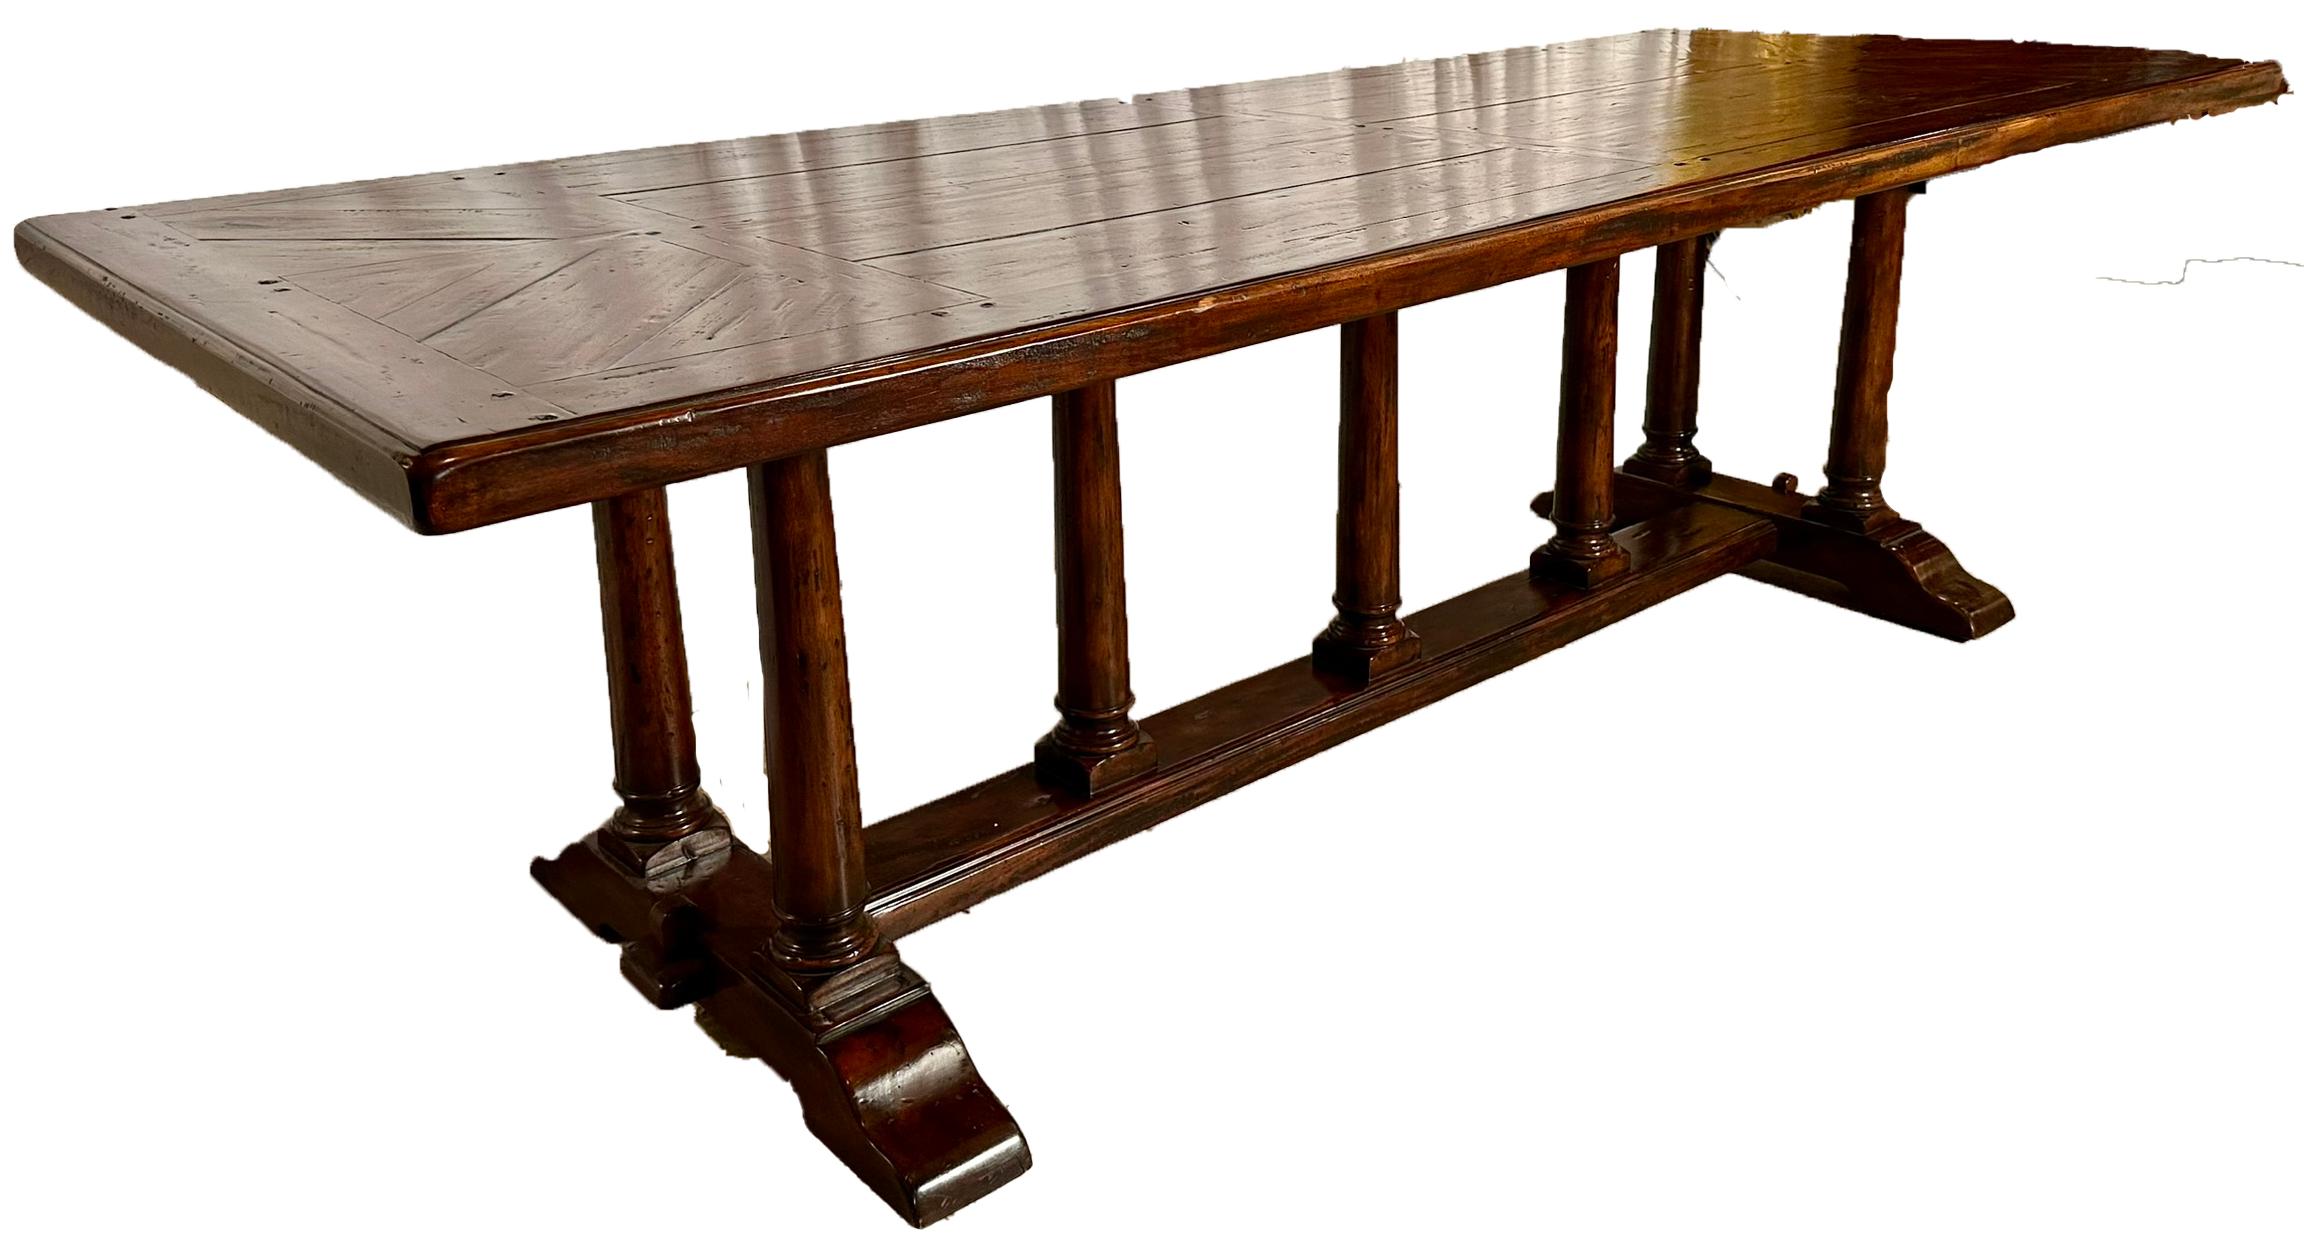 20th Century Antique English Yew Wood Trestle Table, Circa 1900. For Sale